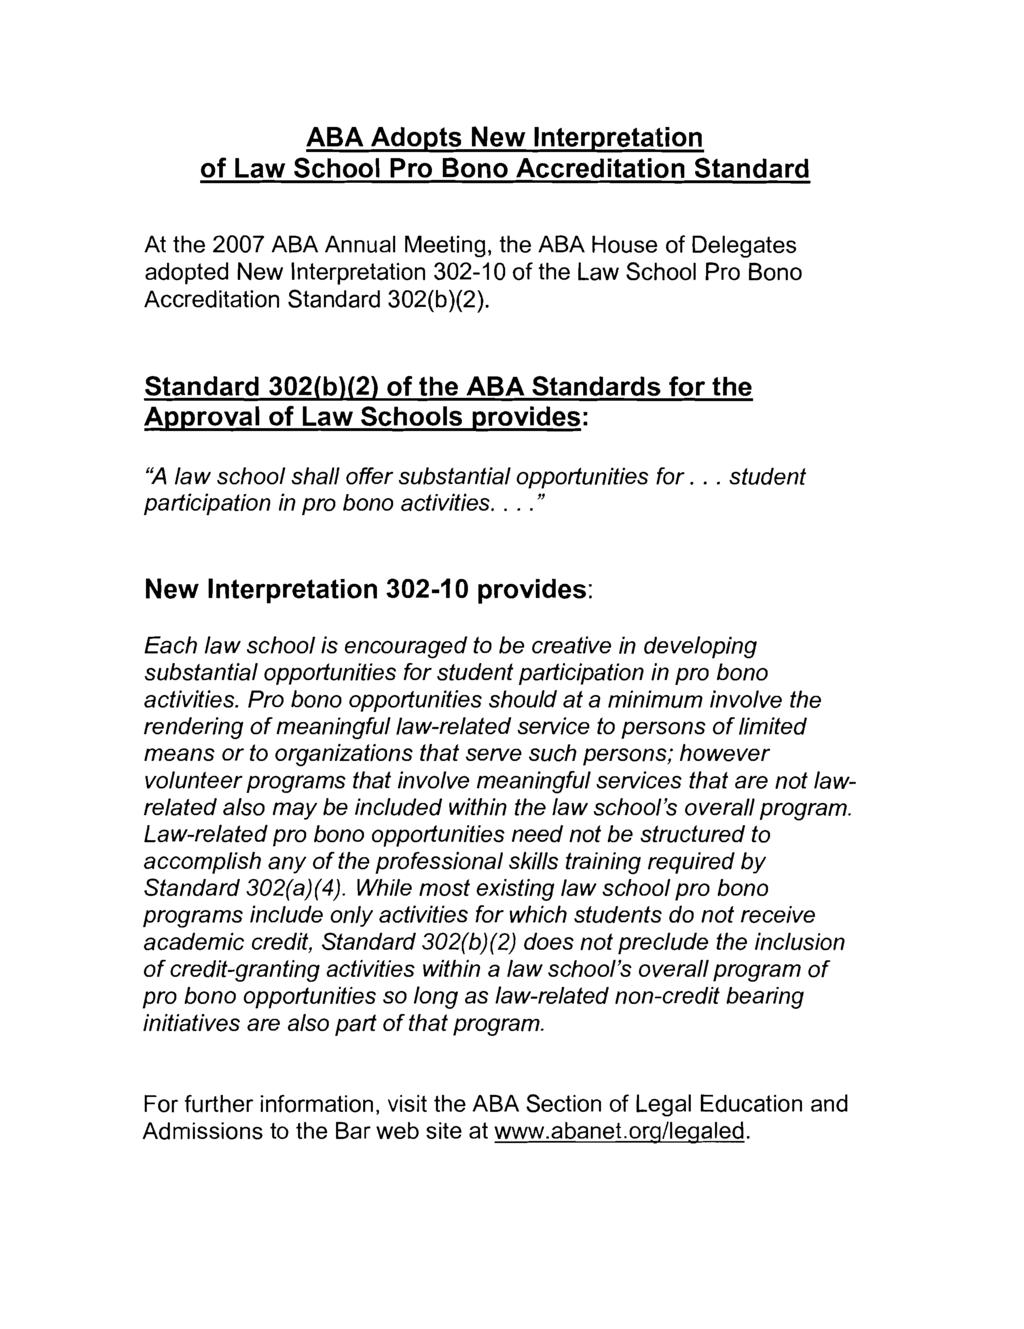 ABA Adopts New Interpretation of Law School Pro Bono Accreditation Standard At the 2007 ABA Annual Meeting, the ABA House of Delegates adopted New lnterpretation 302-1 0 of the Law School Pro Bono